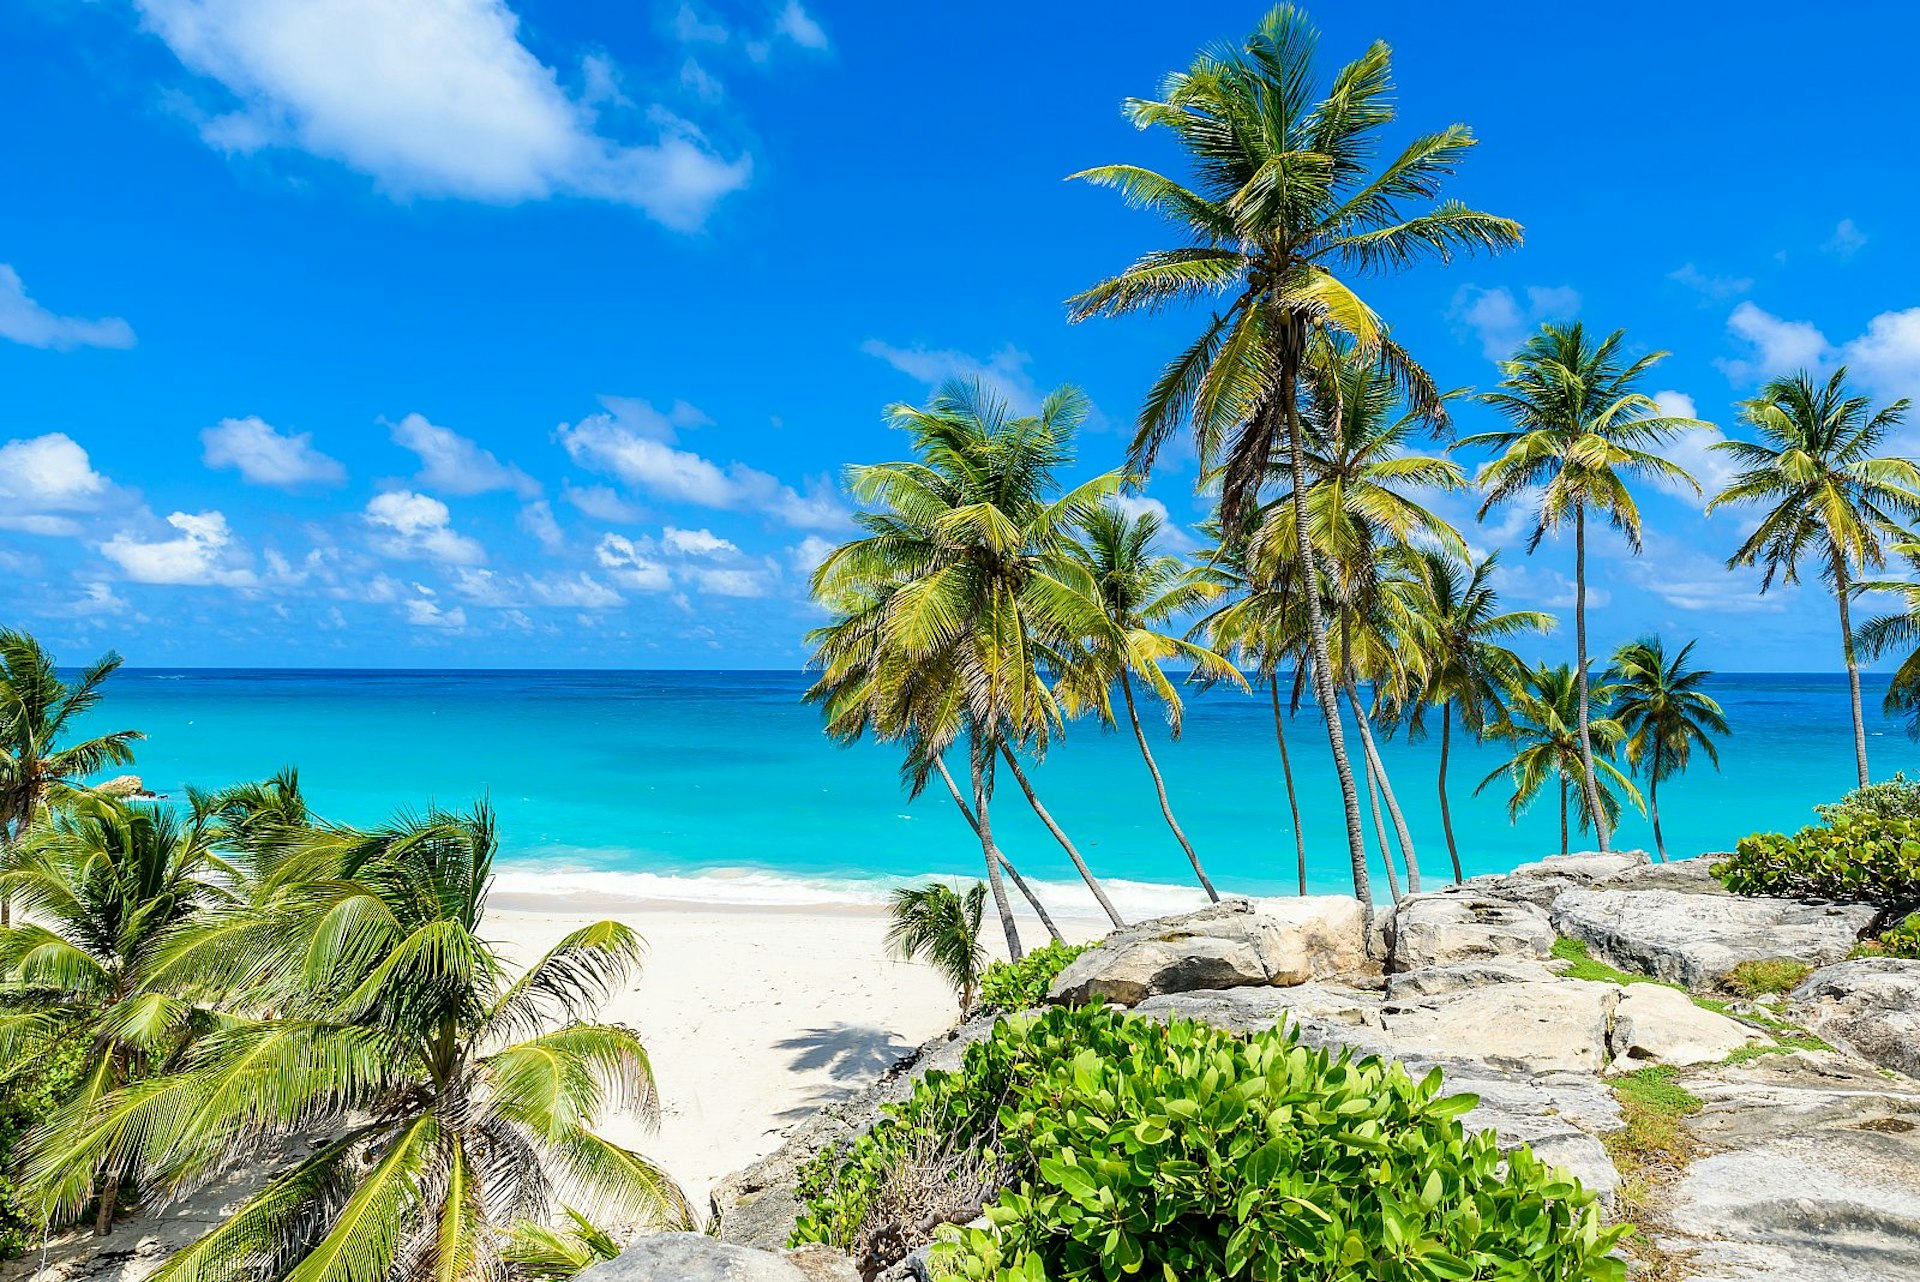 Bottom Bay in Barbados: we see a tropical coastline with a white-sand beach and palm trees hanging over turquoise sea.